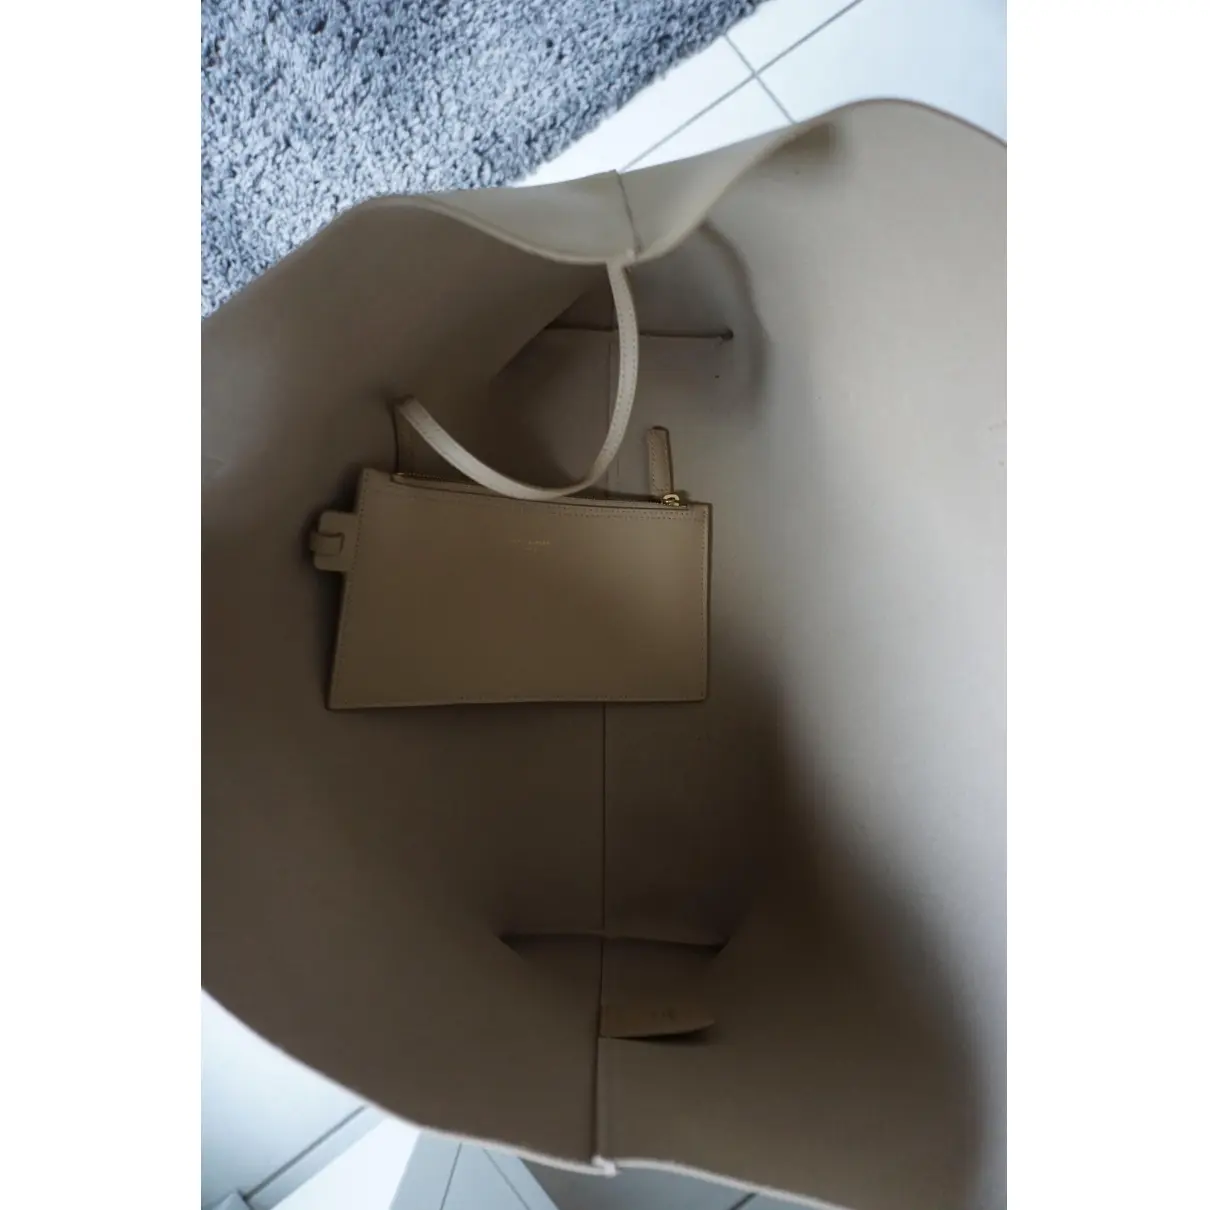 Shopping leather tote Saint Laurent